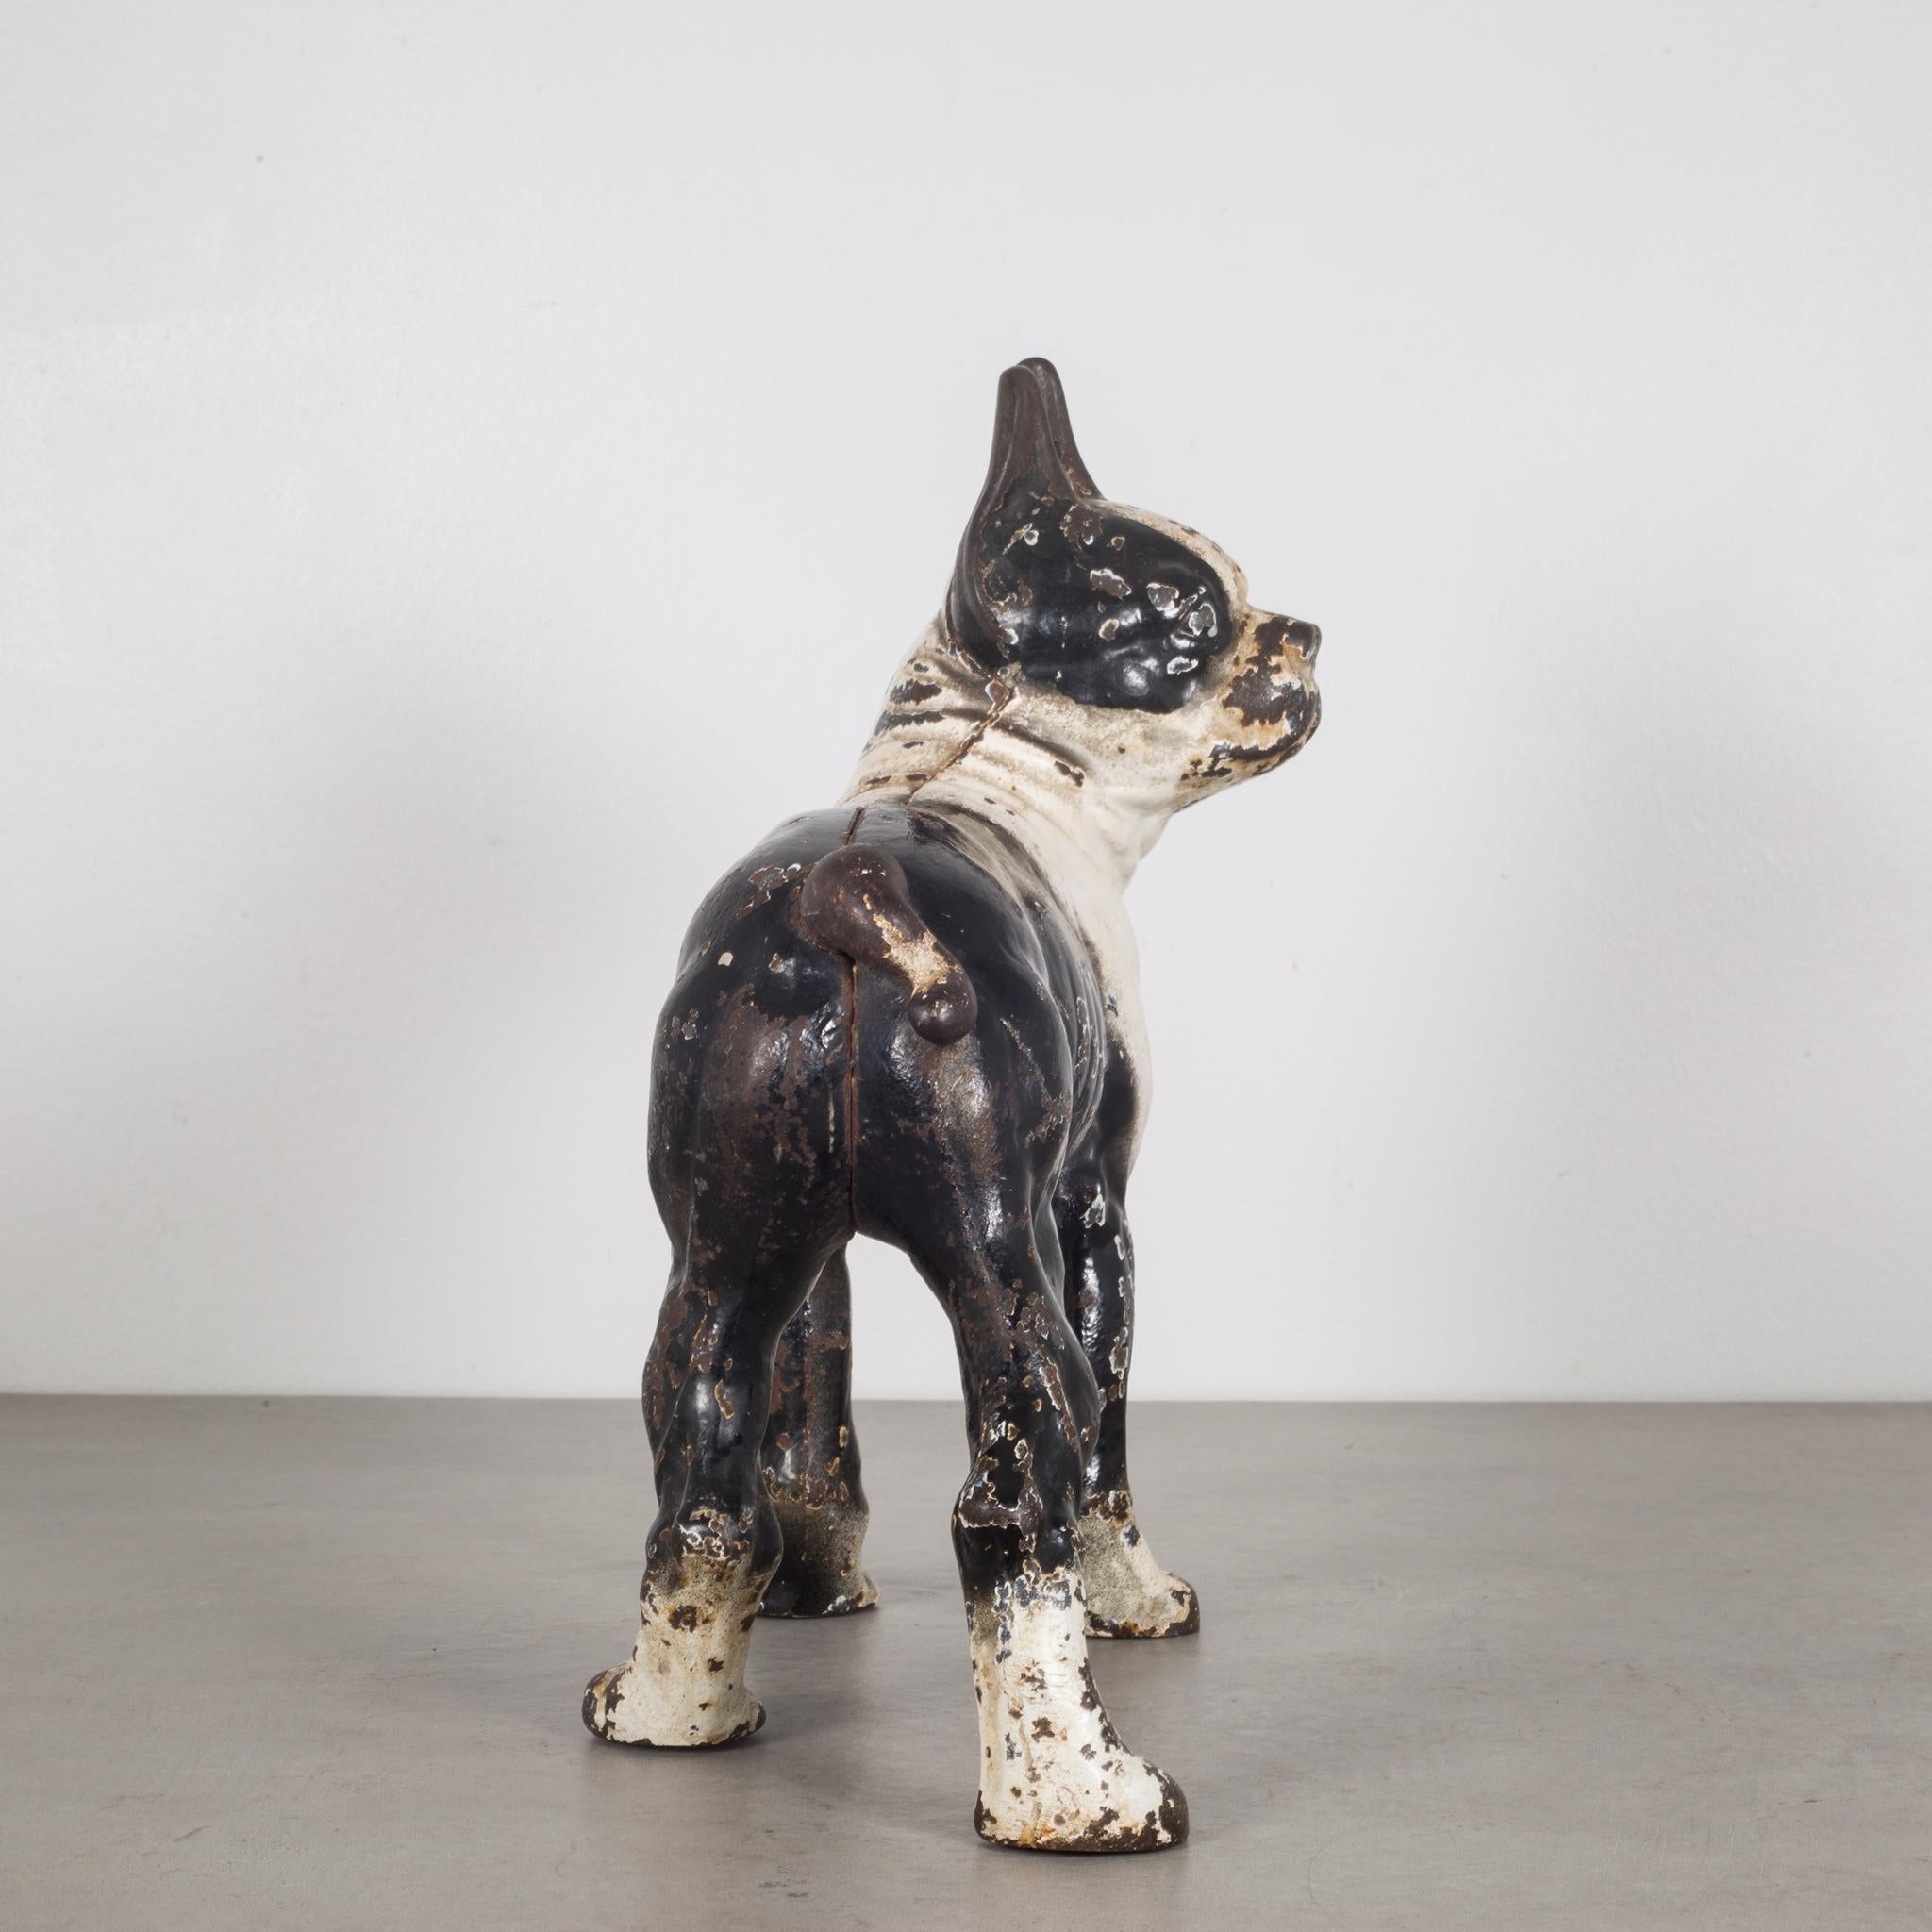 Industrial Early 20th Century Cast Iron Boston Terrier Doorstop by Hubley, circa 1910-1930s